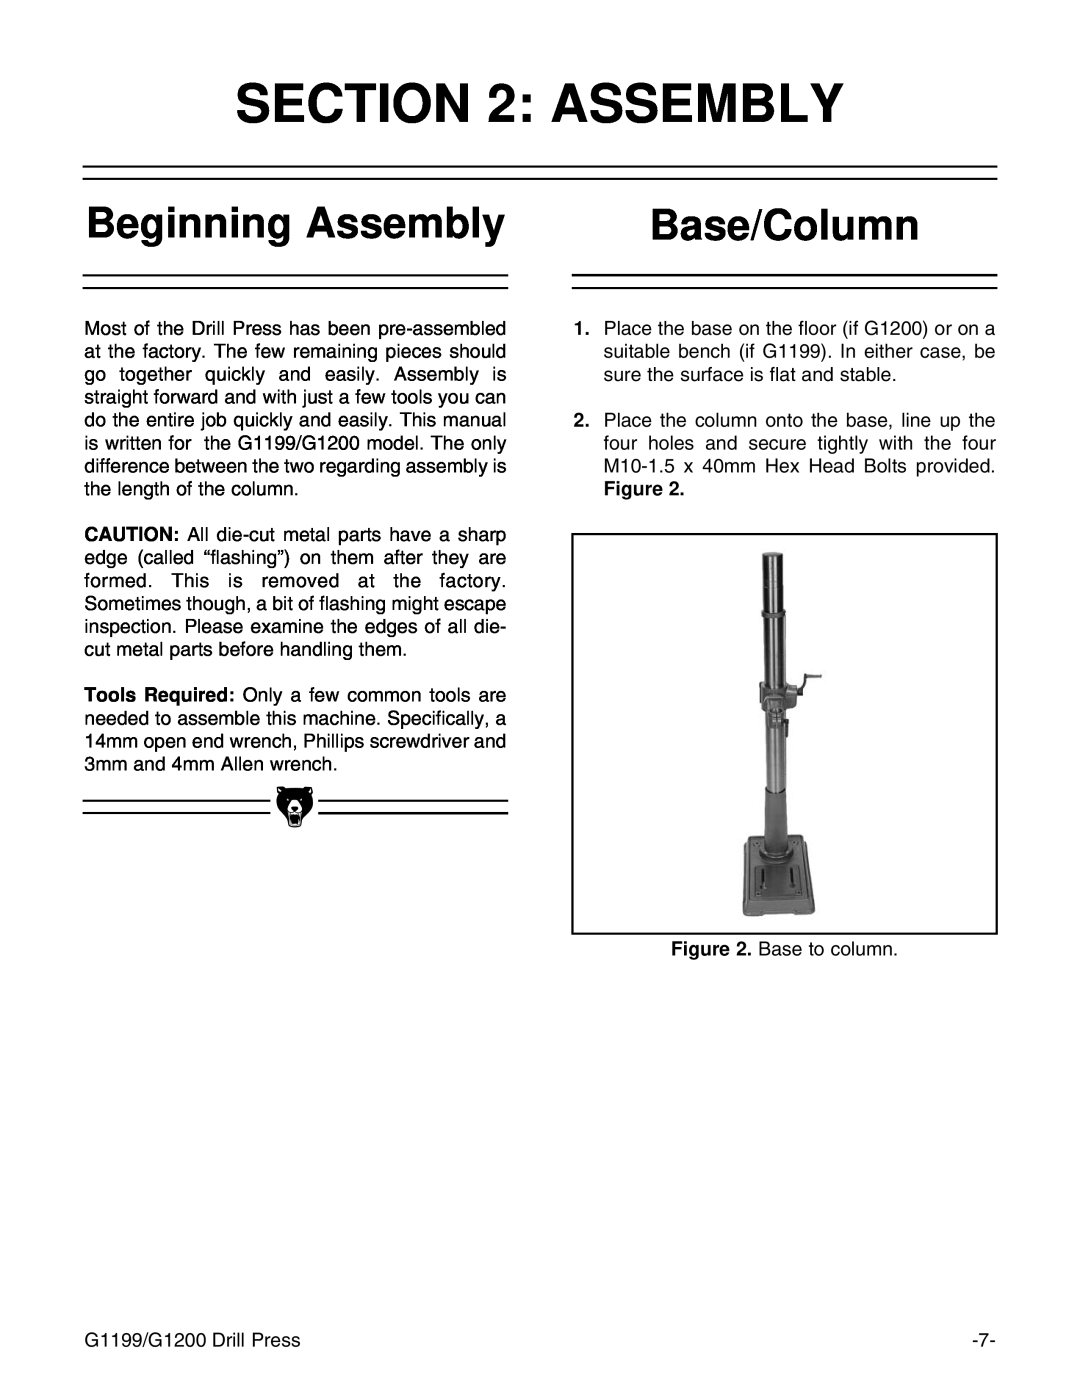 Grizzly G1200, G1199 instruction manual Beginning Assembly, Base/Column 